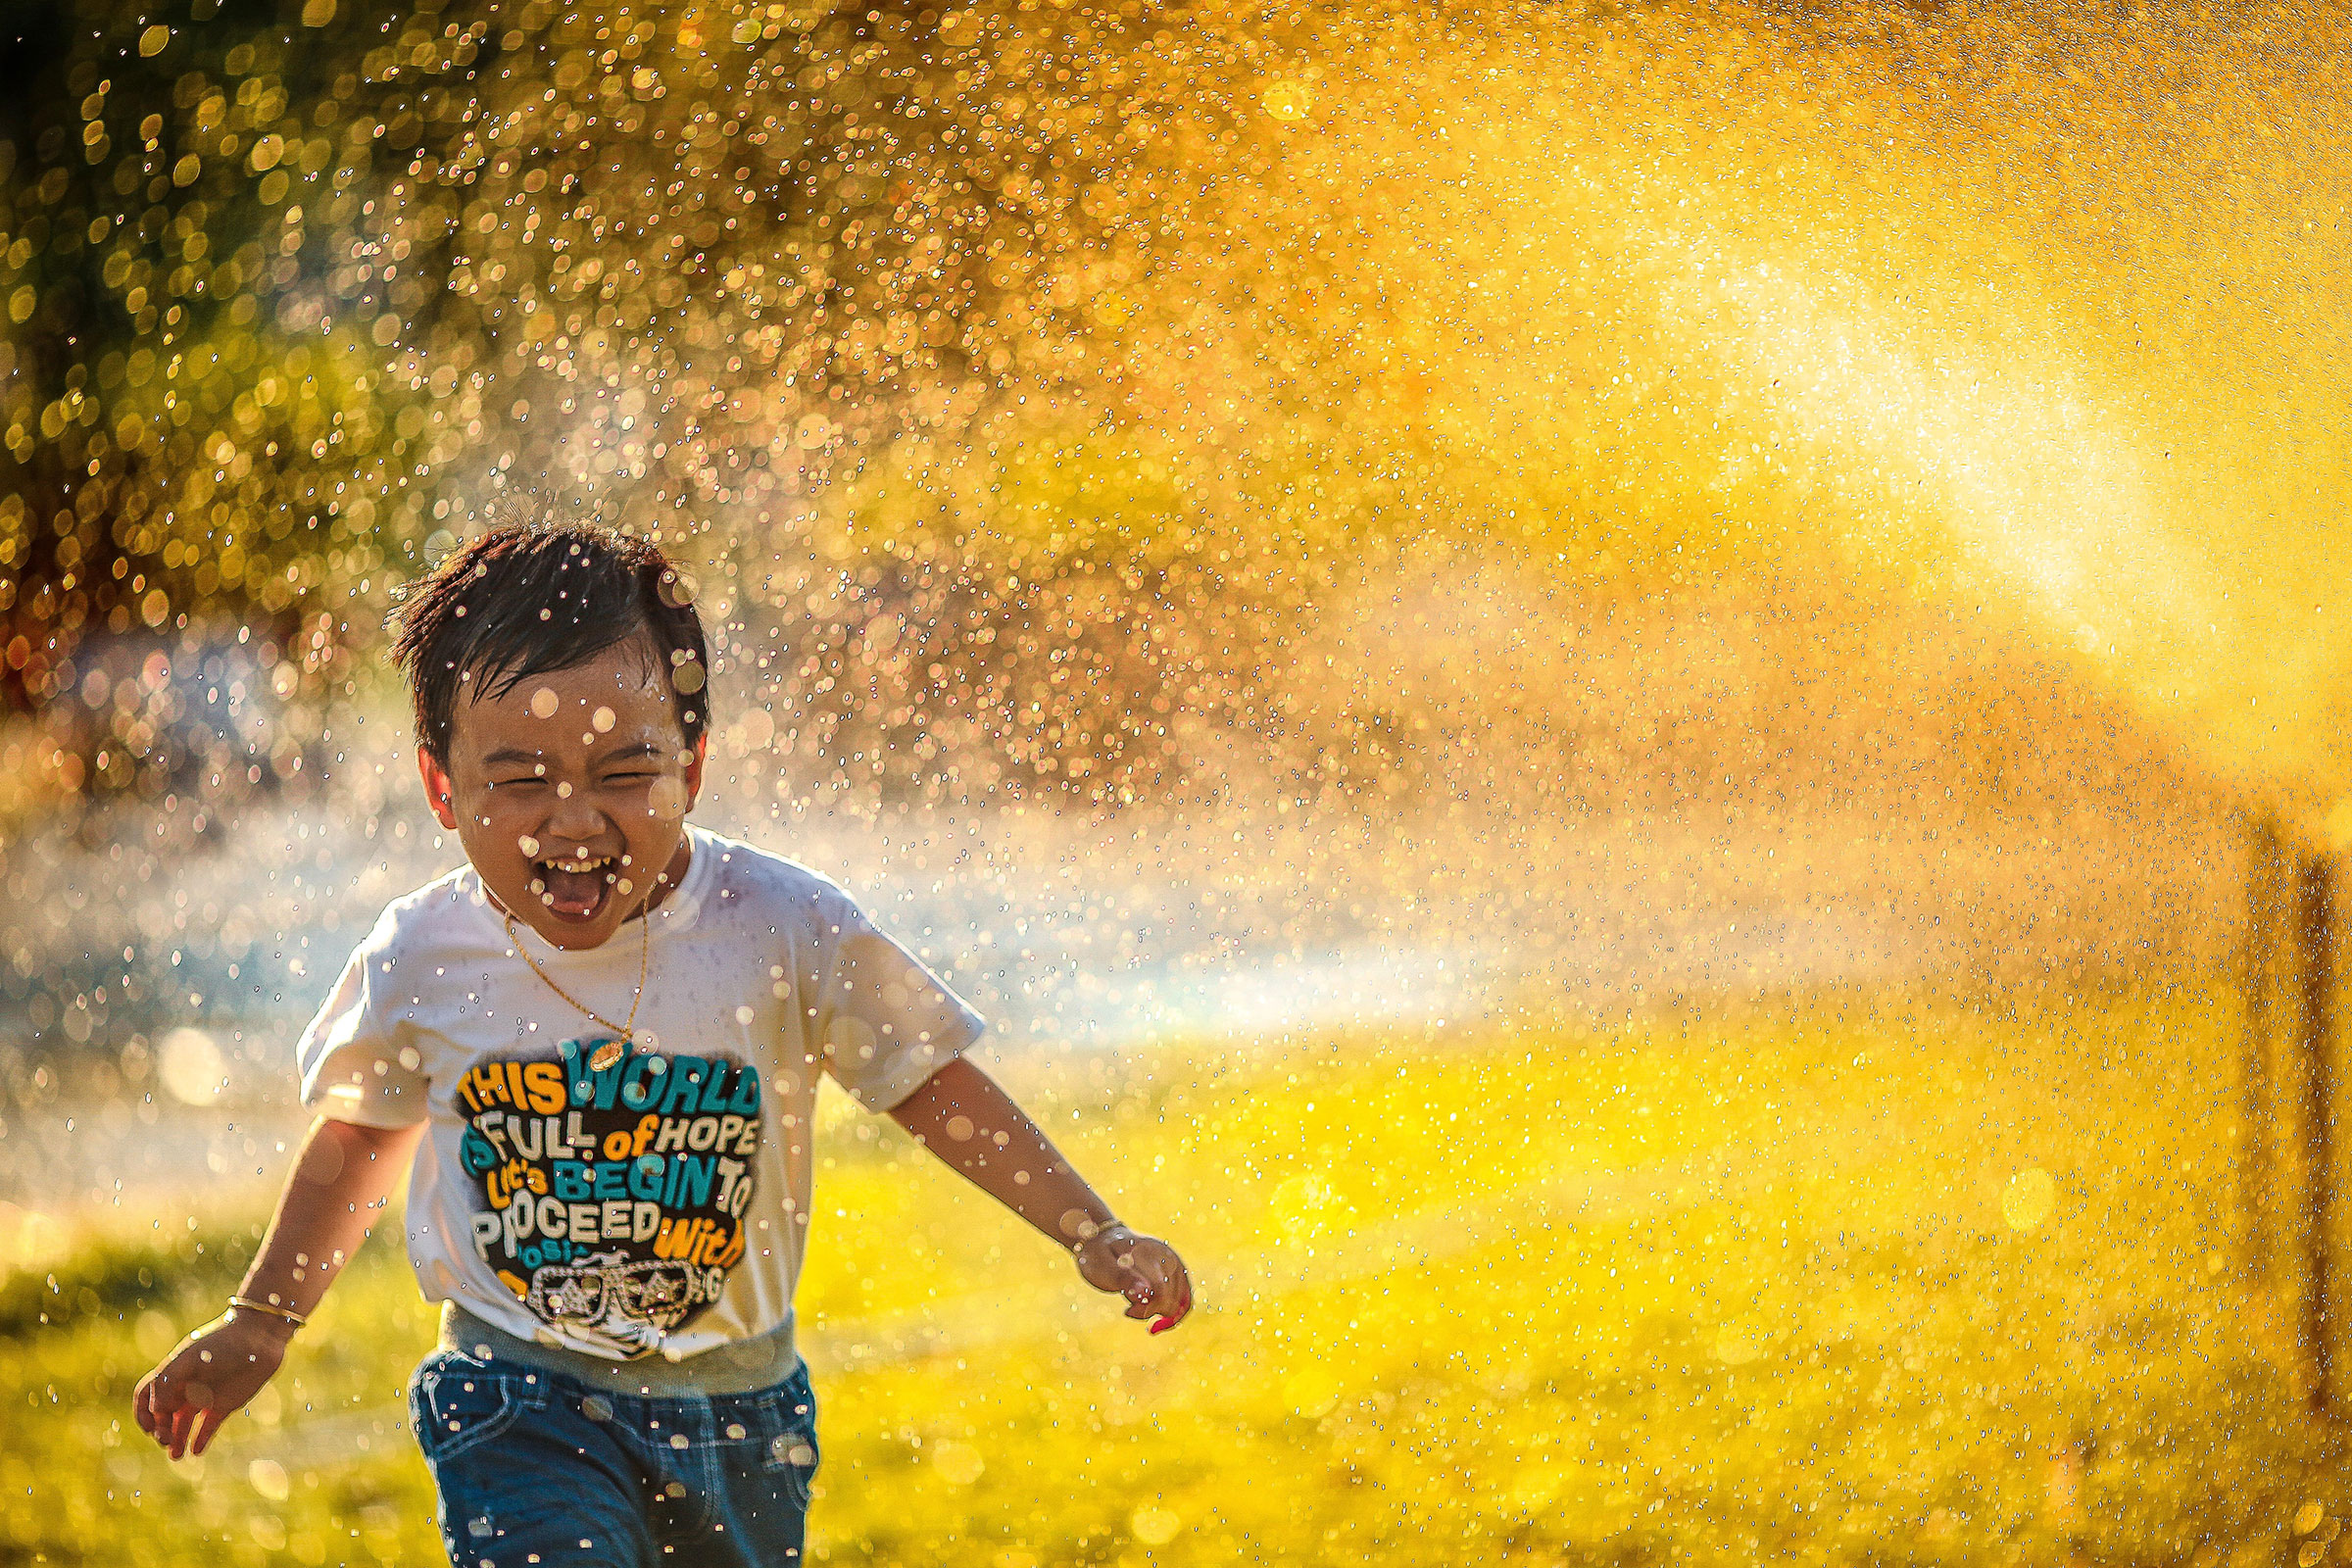 A preschool aged boy plays in a water sprinkler with bright sunlight shining